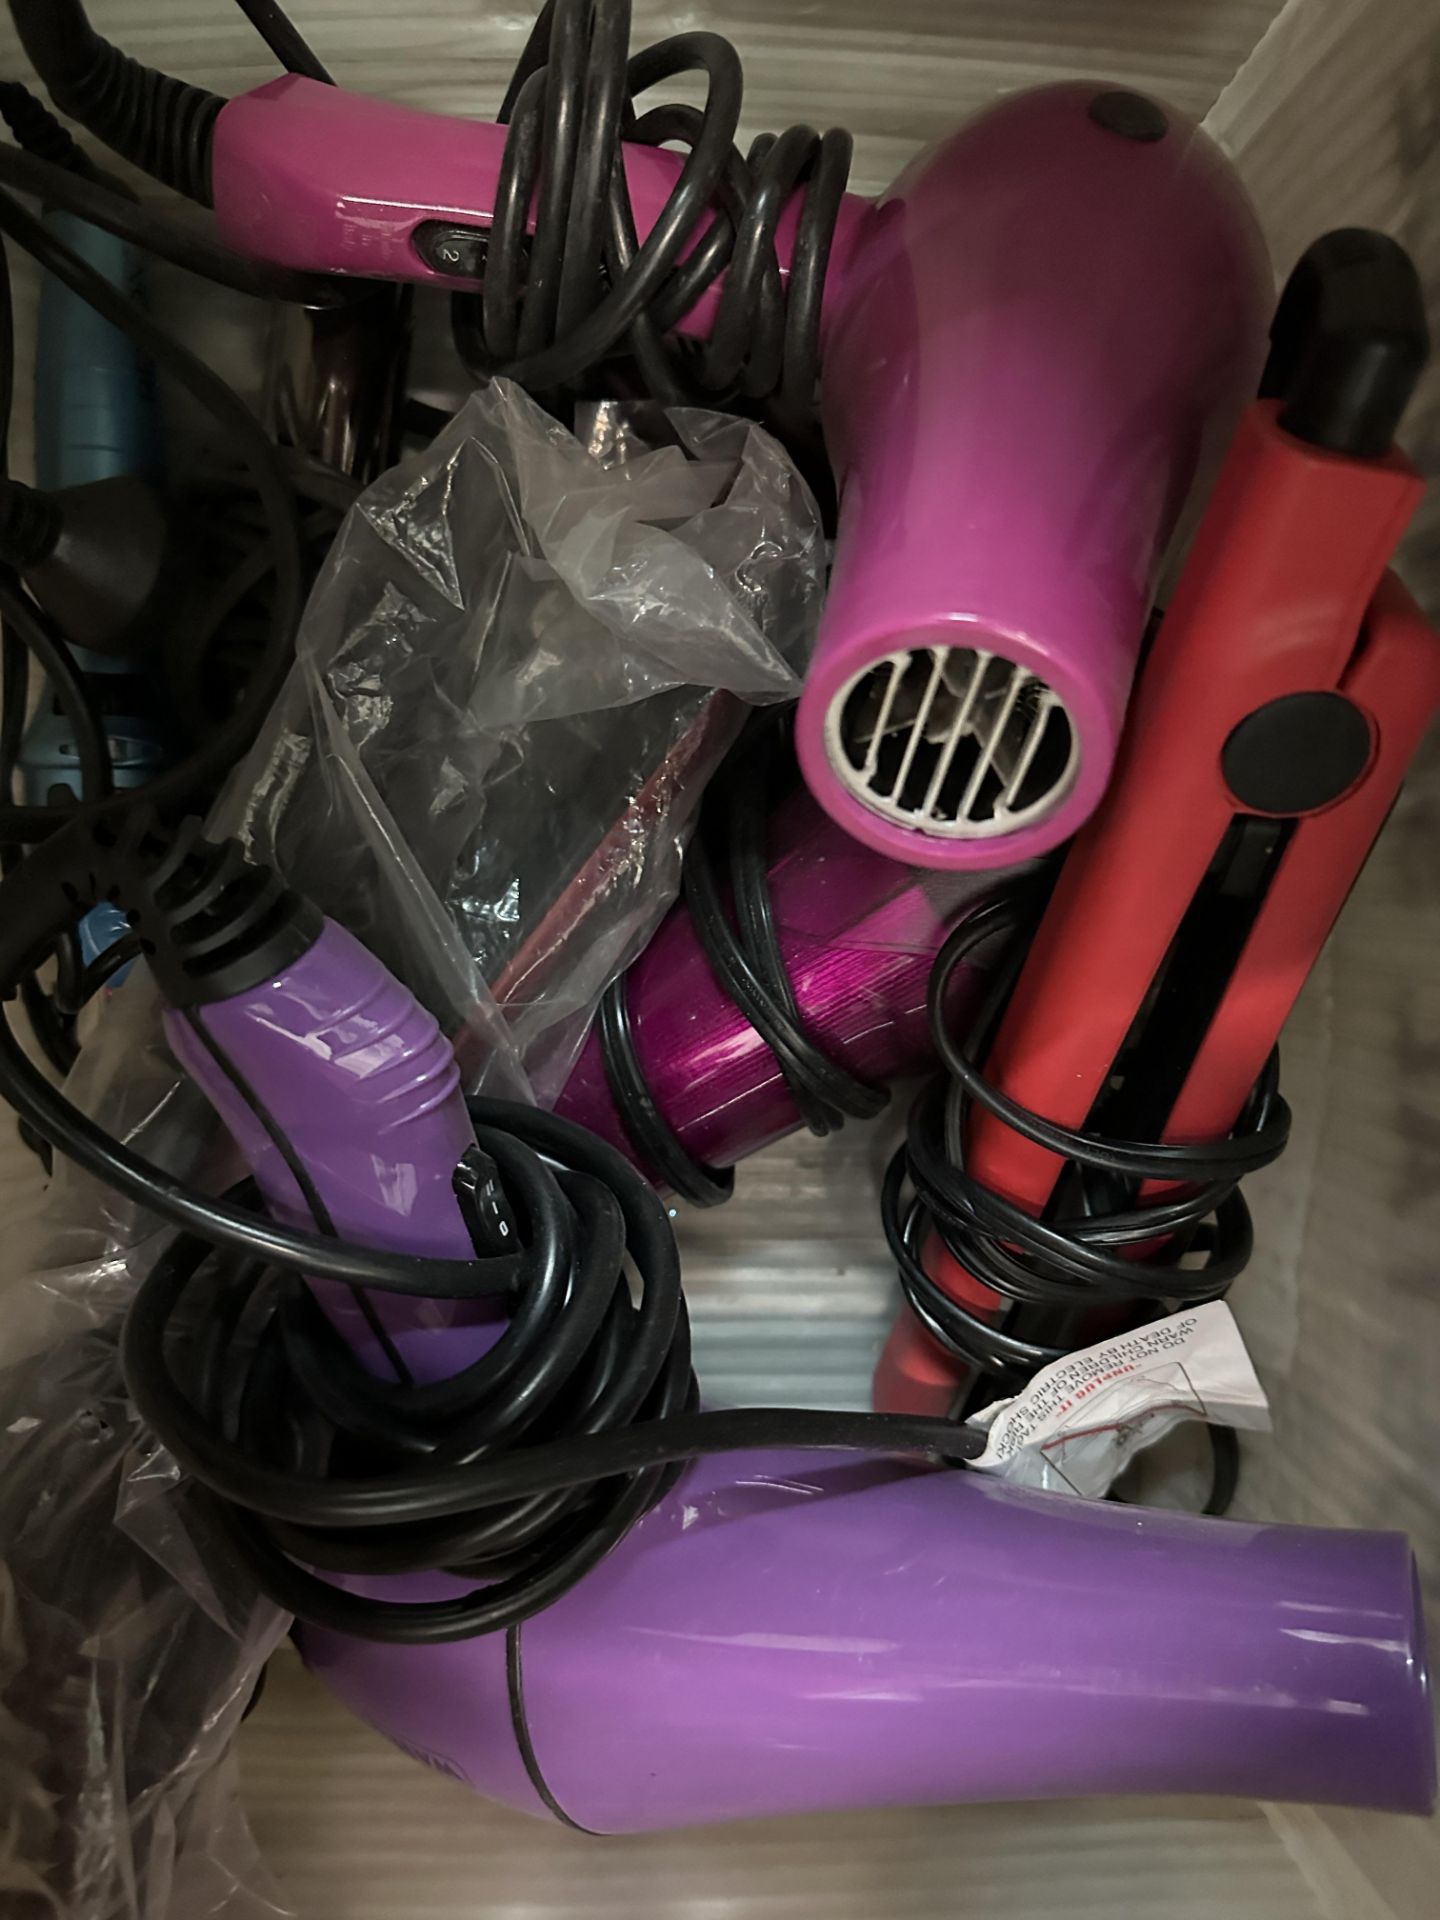 Assorted Lot of Hair Care Devices: Straighteners, Hair Dryers, Travel Bags, Etc., ARA12 - Image 5 of 5